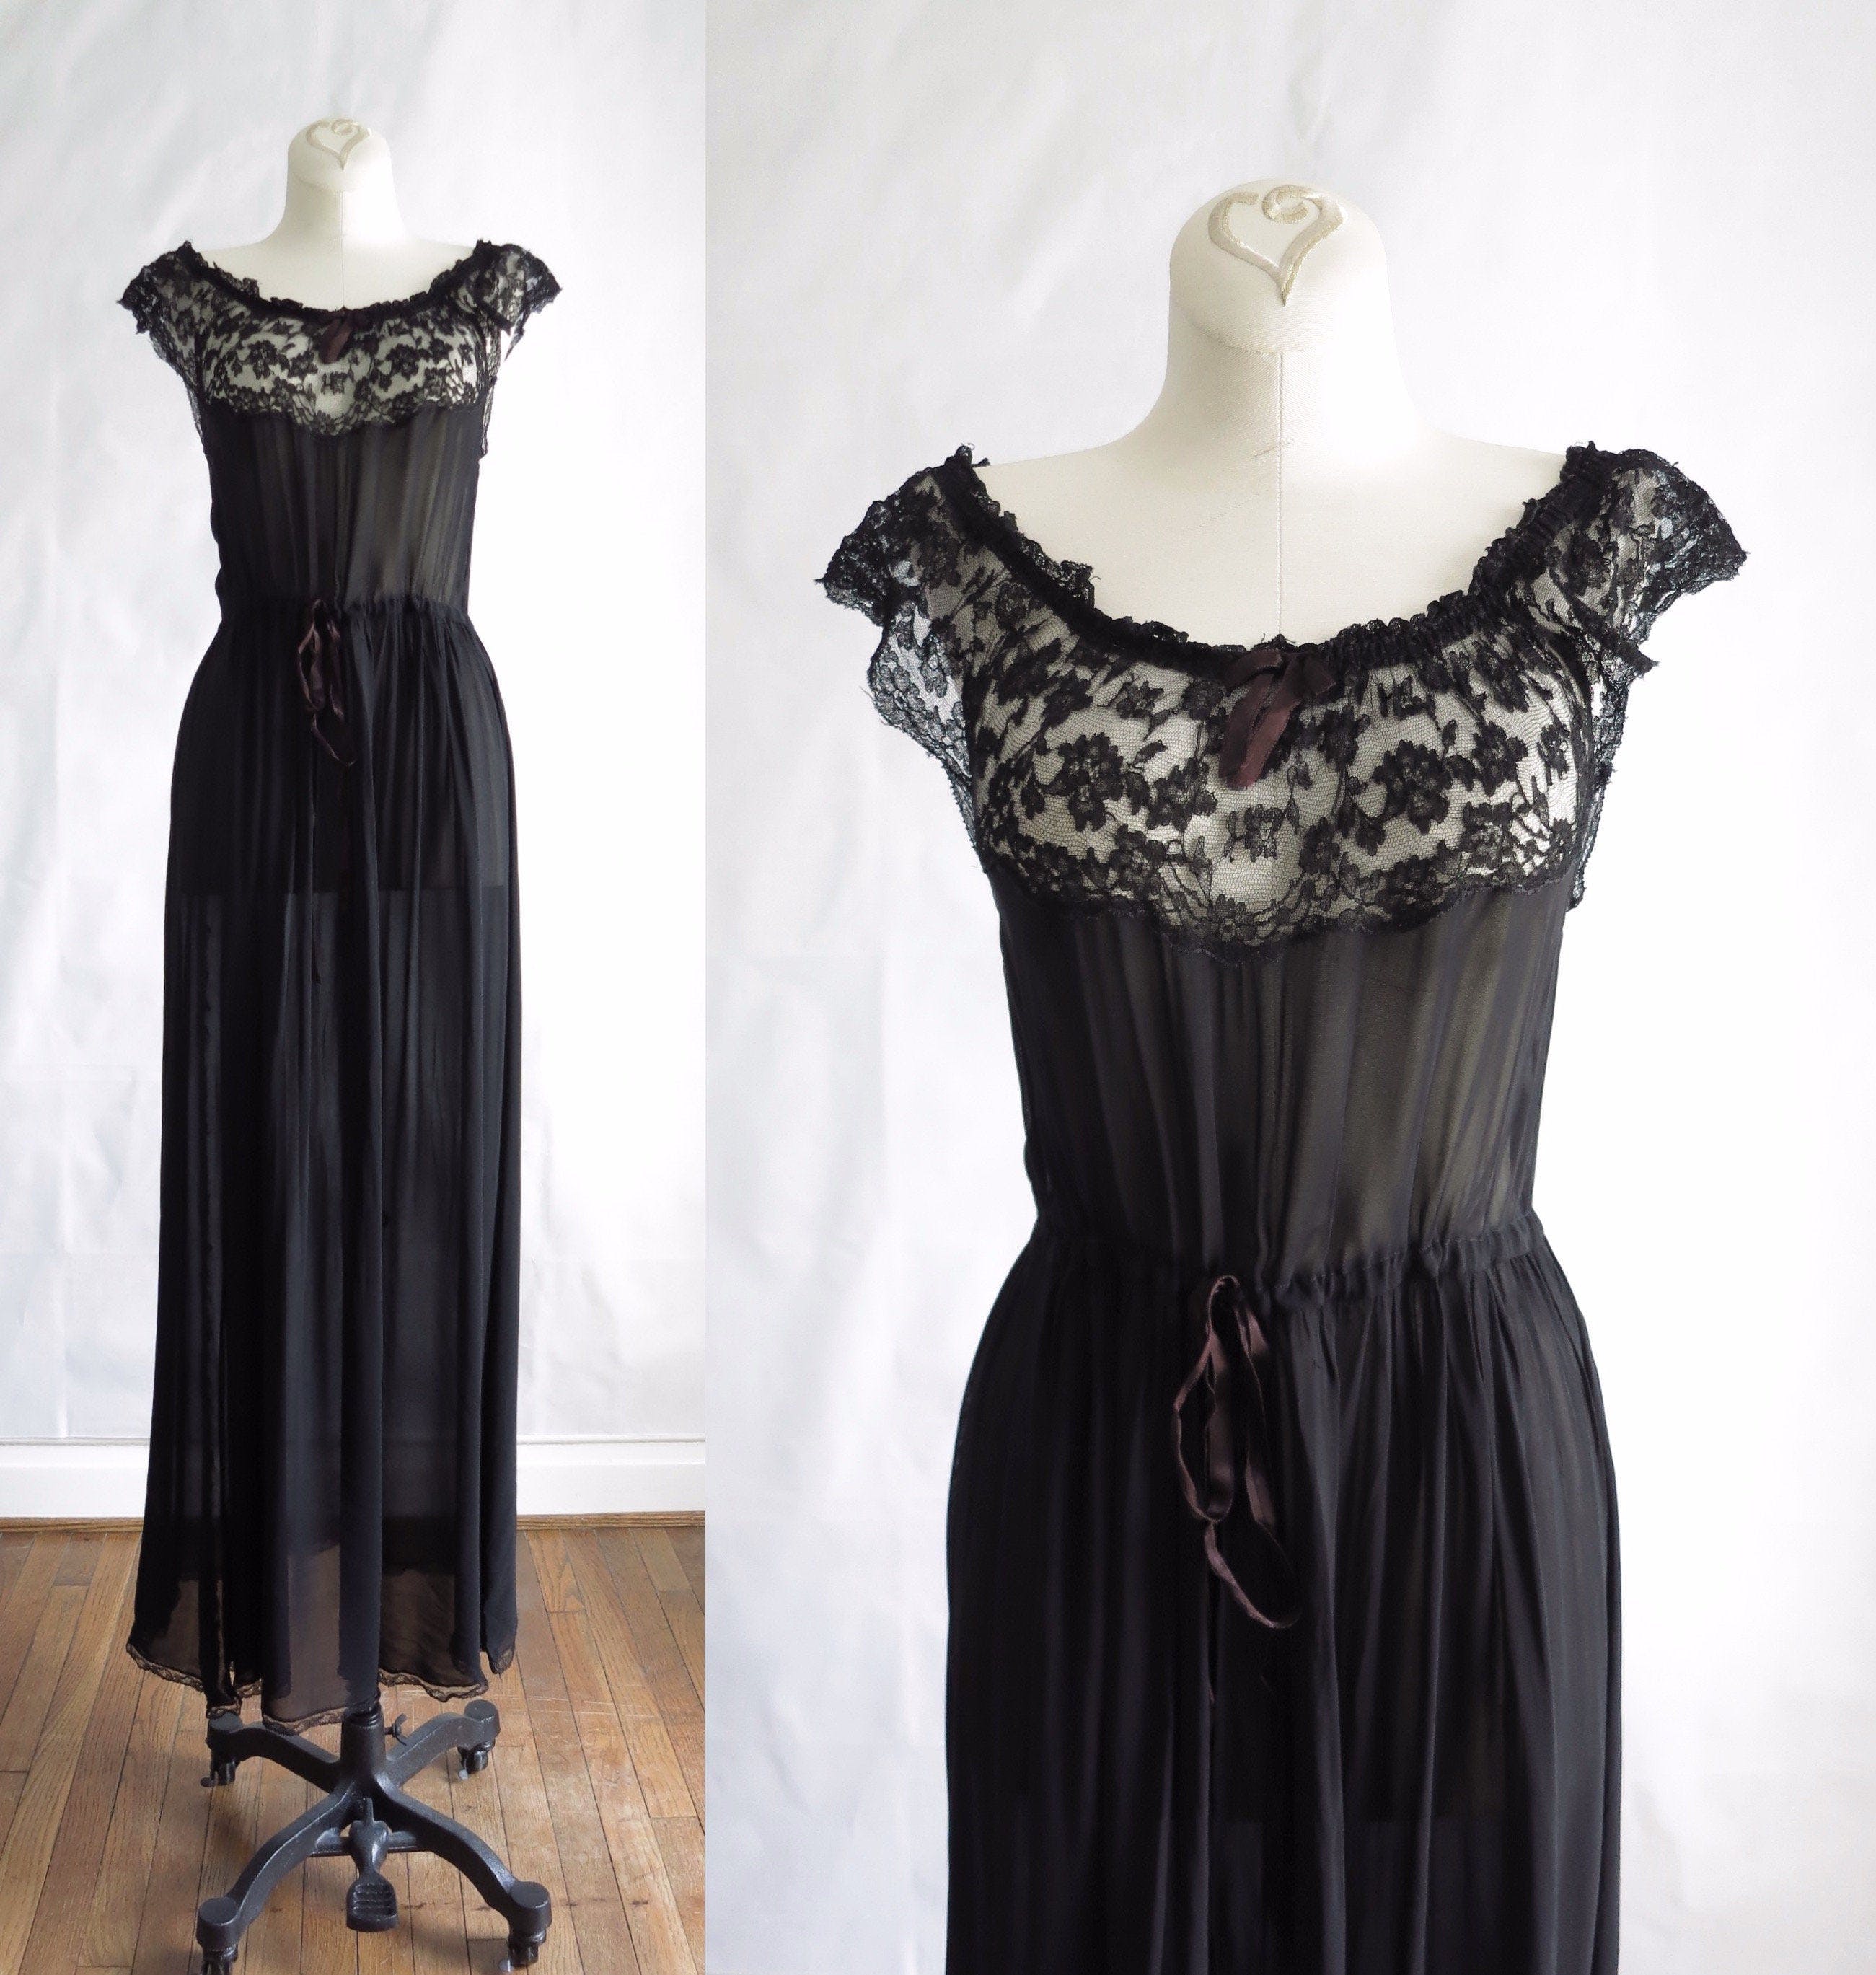 Vintage 40's Black Lace and Satin Maxi Nightgown by Blanche | Shop ...